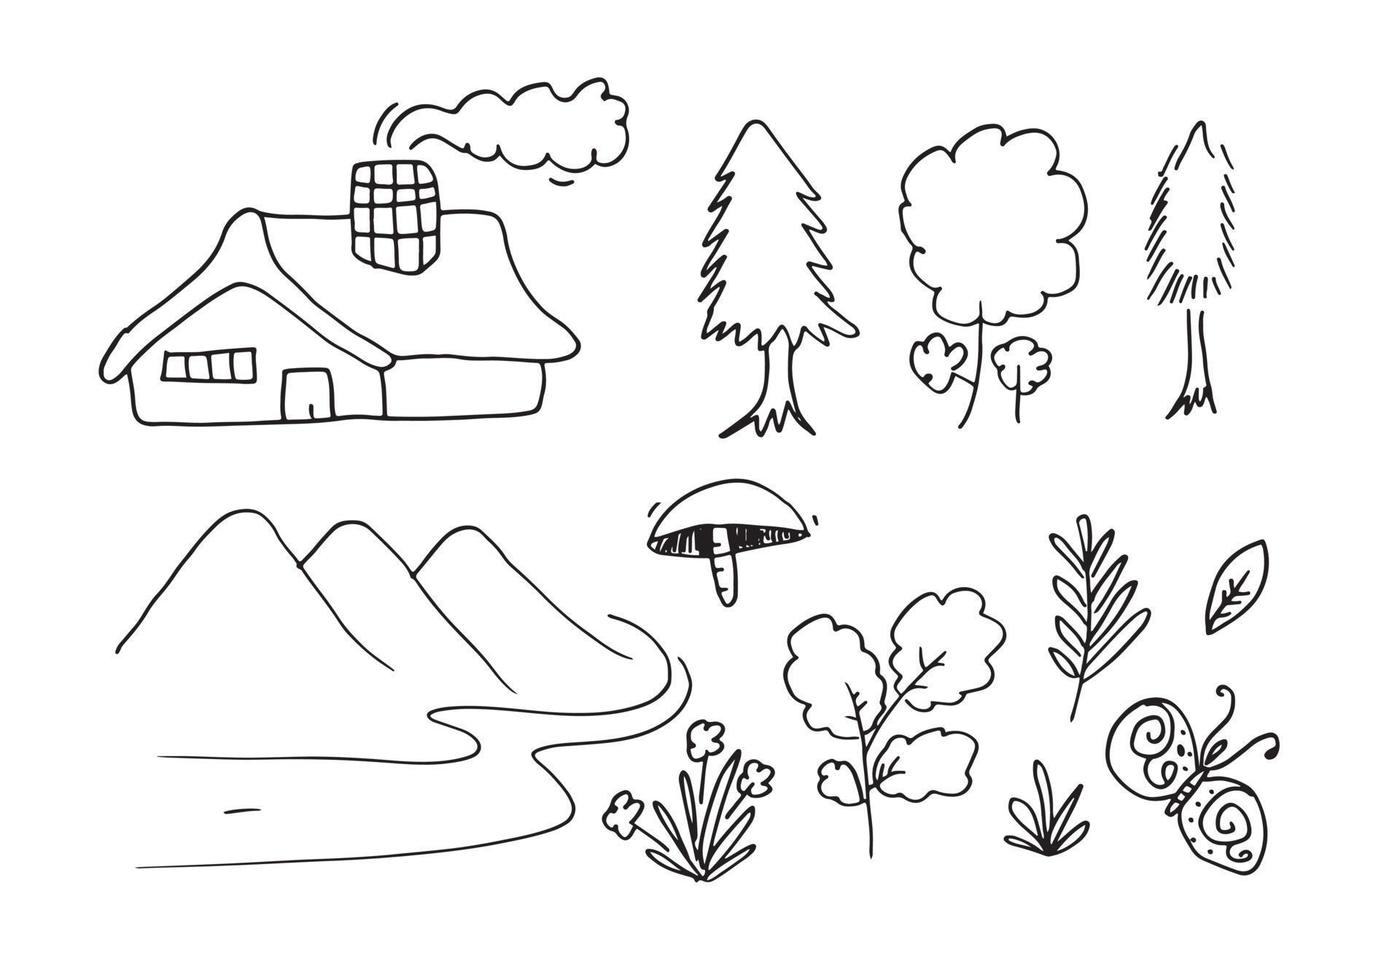 Hand drawn Mountains sketch with forest, road, trees, grass and house.vector illustration. vector